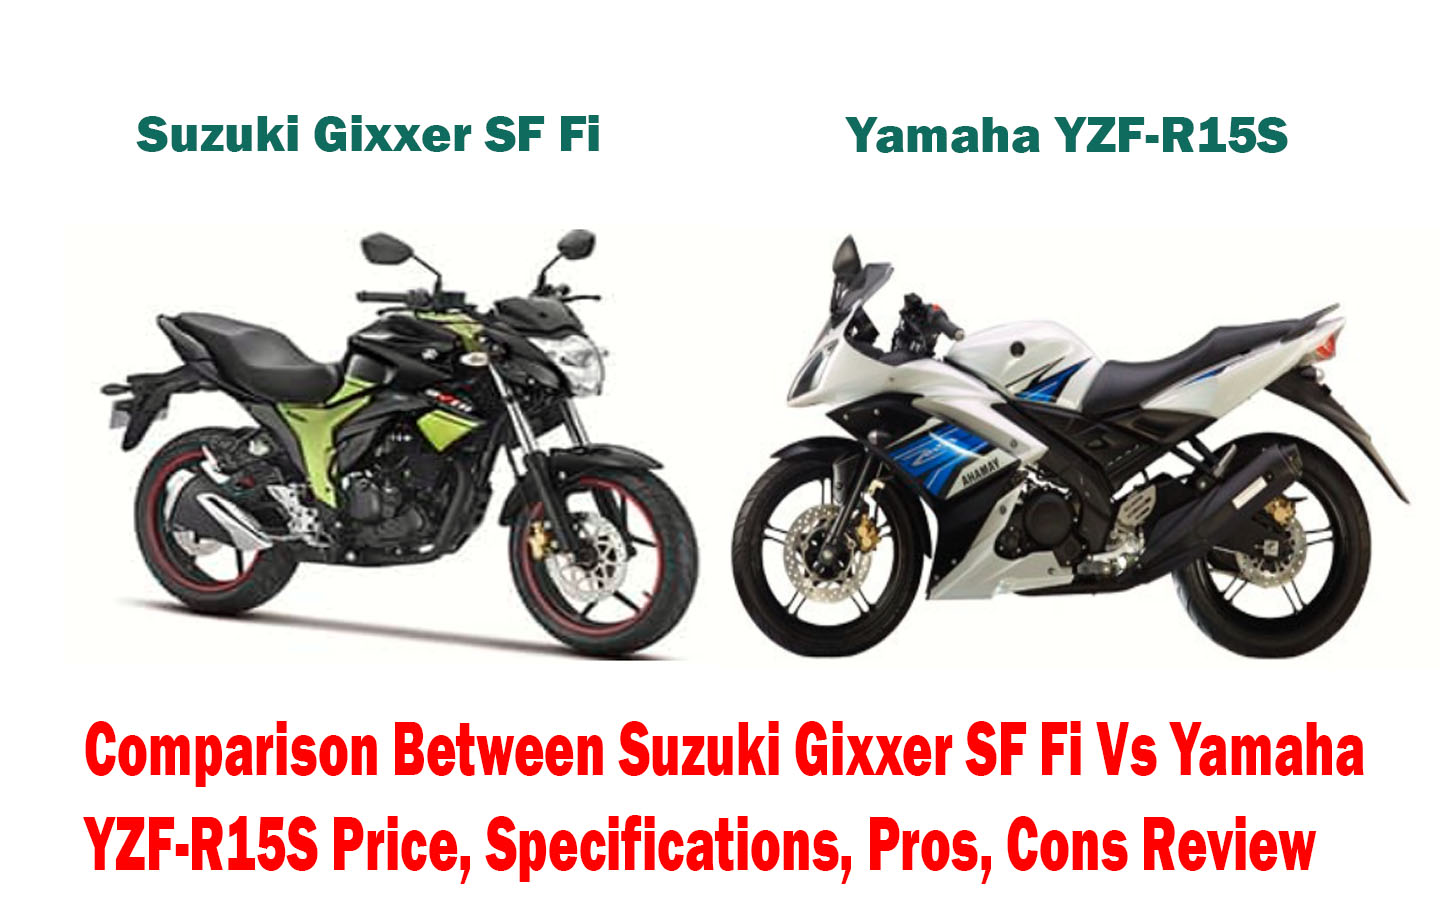 Comparison Between Suzuki Gixxer SF Fi Vs Yamaha YZF-R15S Price, Specifications, Pros, Cons Review